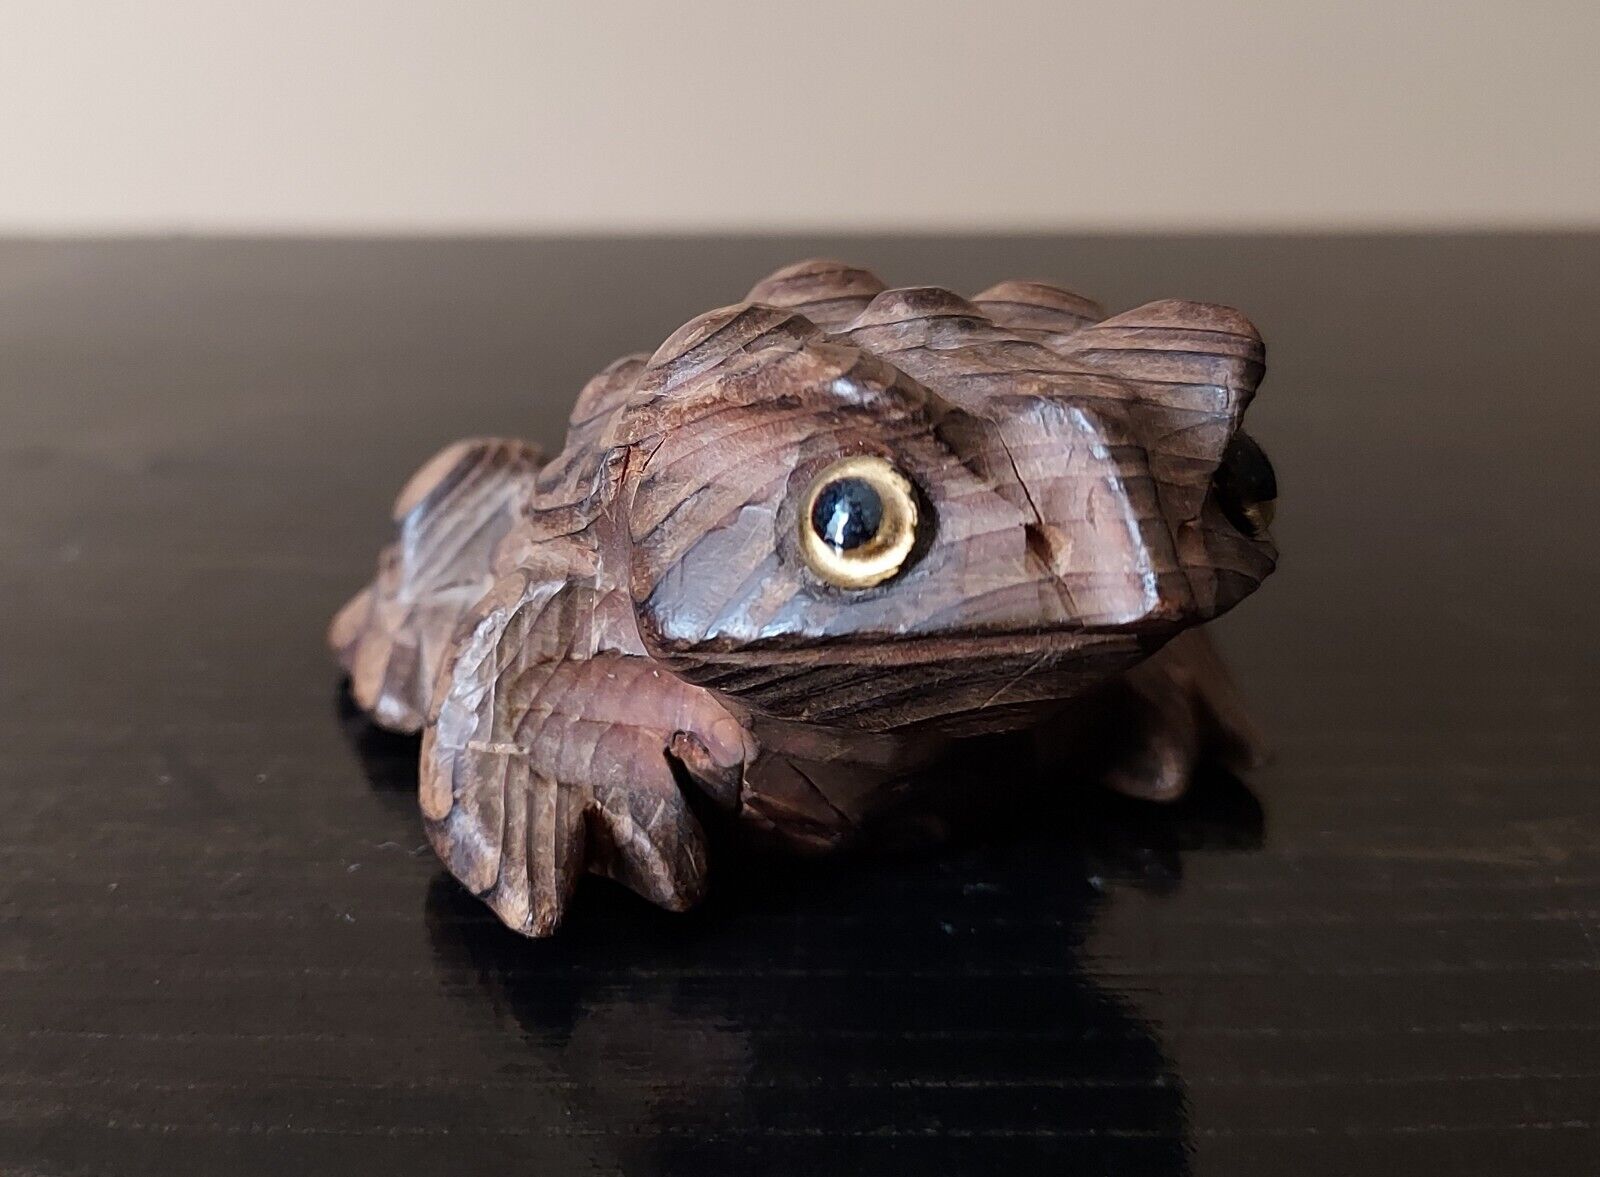 Japanese Cryptomeria Cedar Wooden Handcarved 2" X 2.5 " Toad Frog